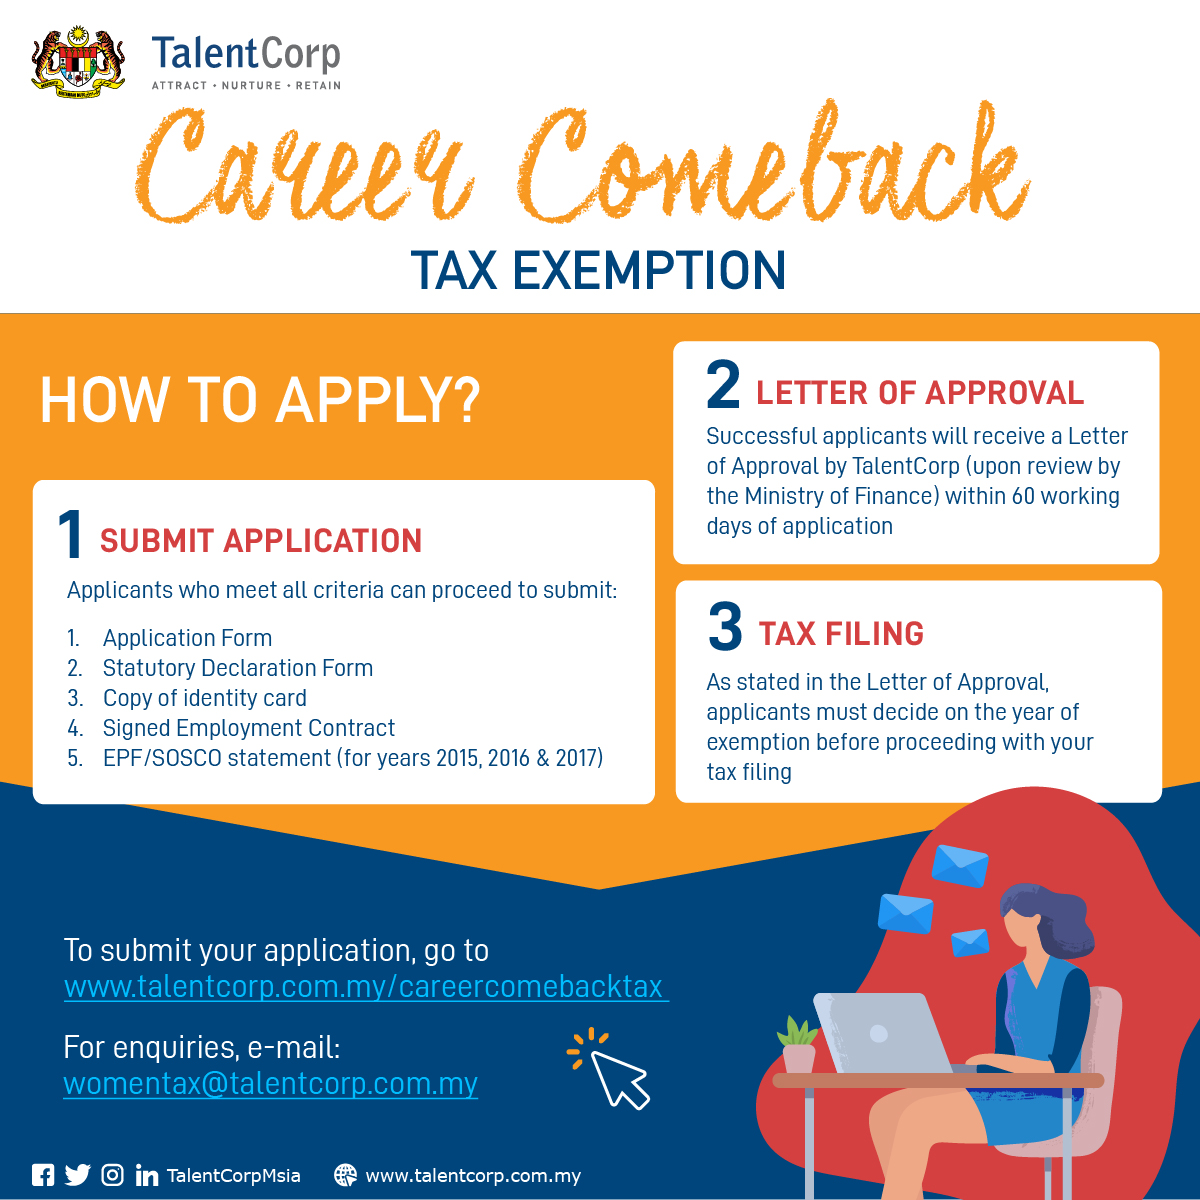 under-the-career-comeback-tax-exemption-my-malay-news